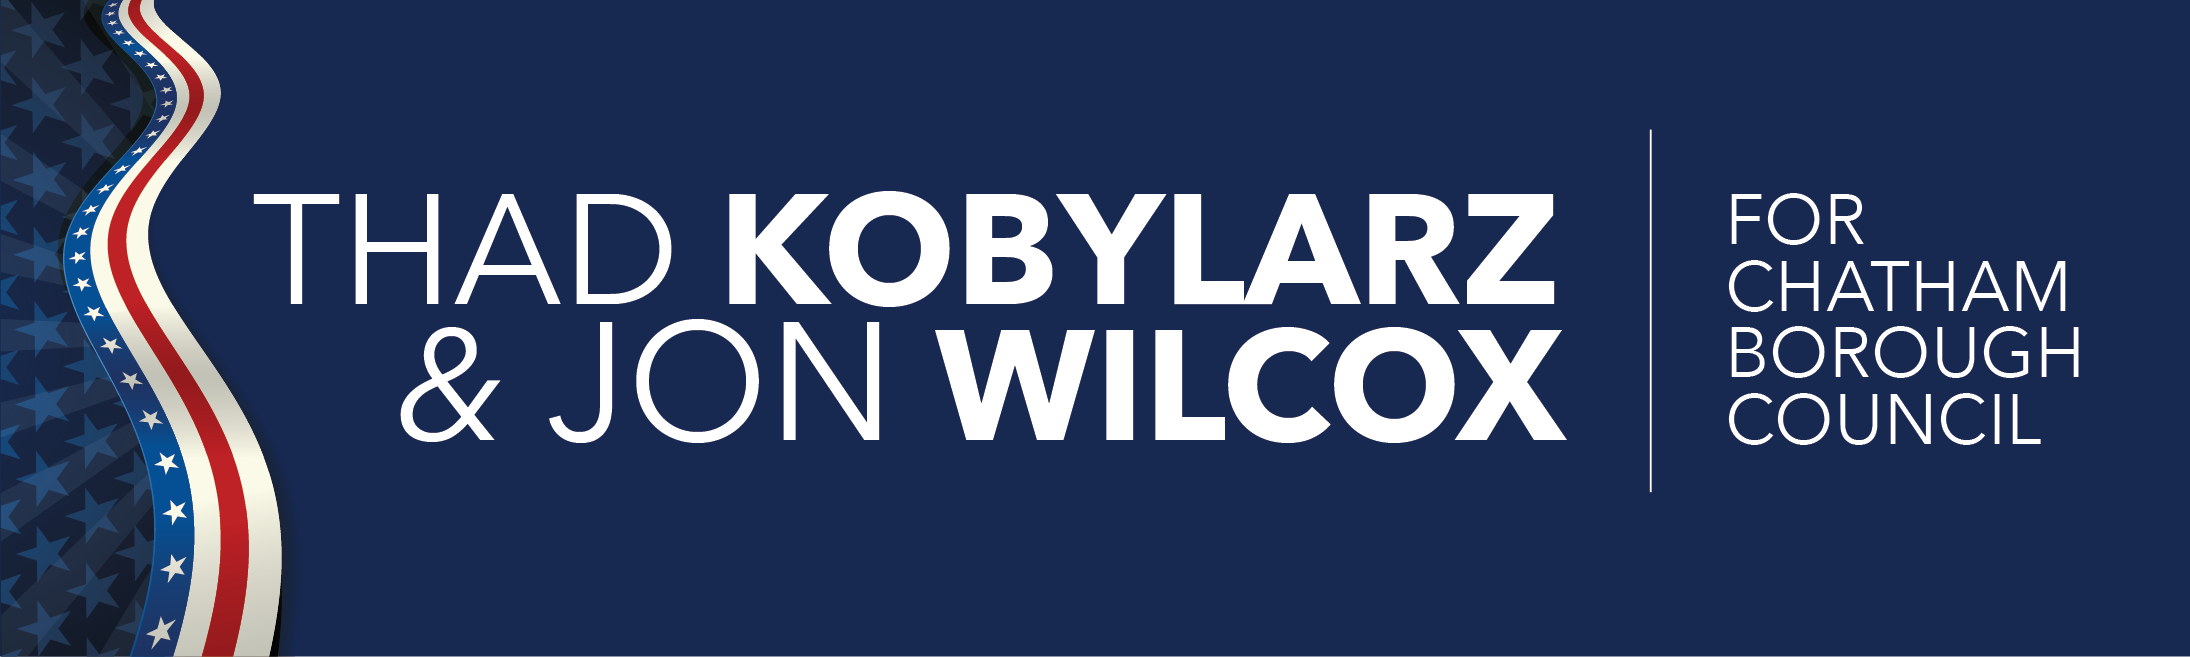 Friends of Kobylarz and Wilcox for Council logo